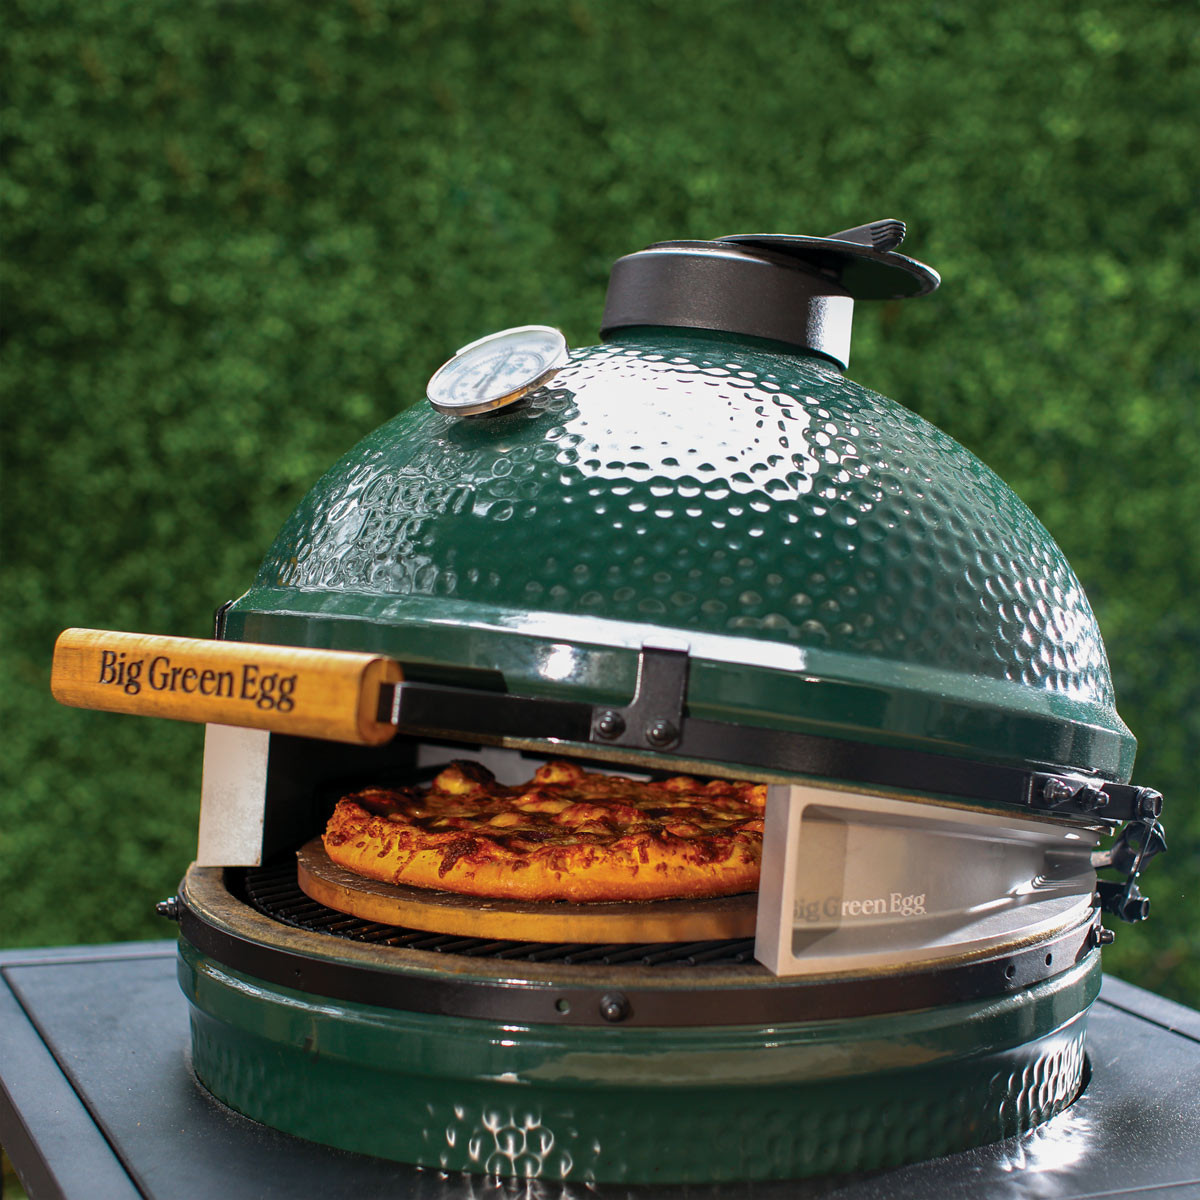 Big Green Egg a Pizza Oven Wedge for Pizza - CookOut News